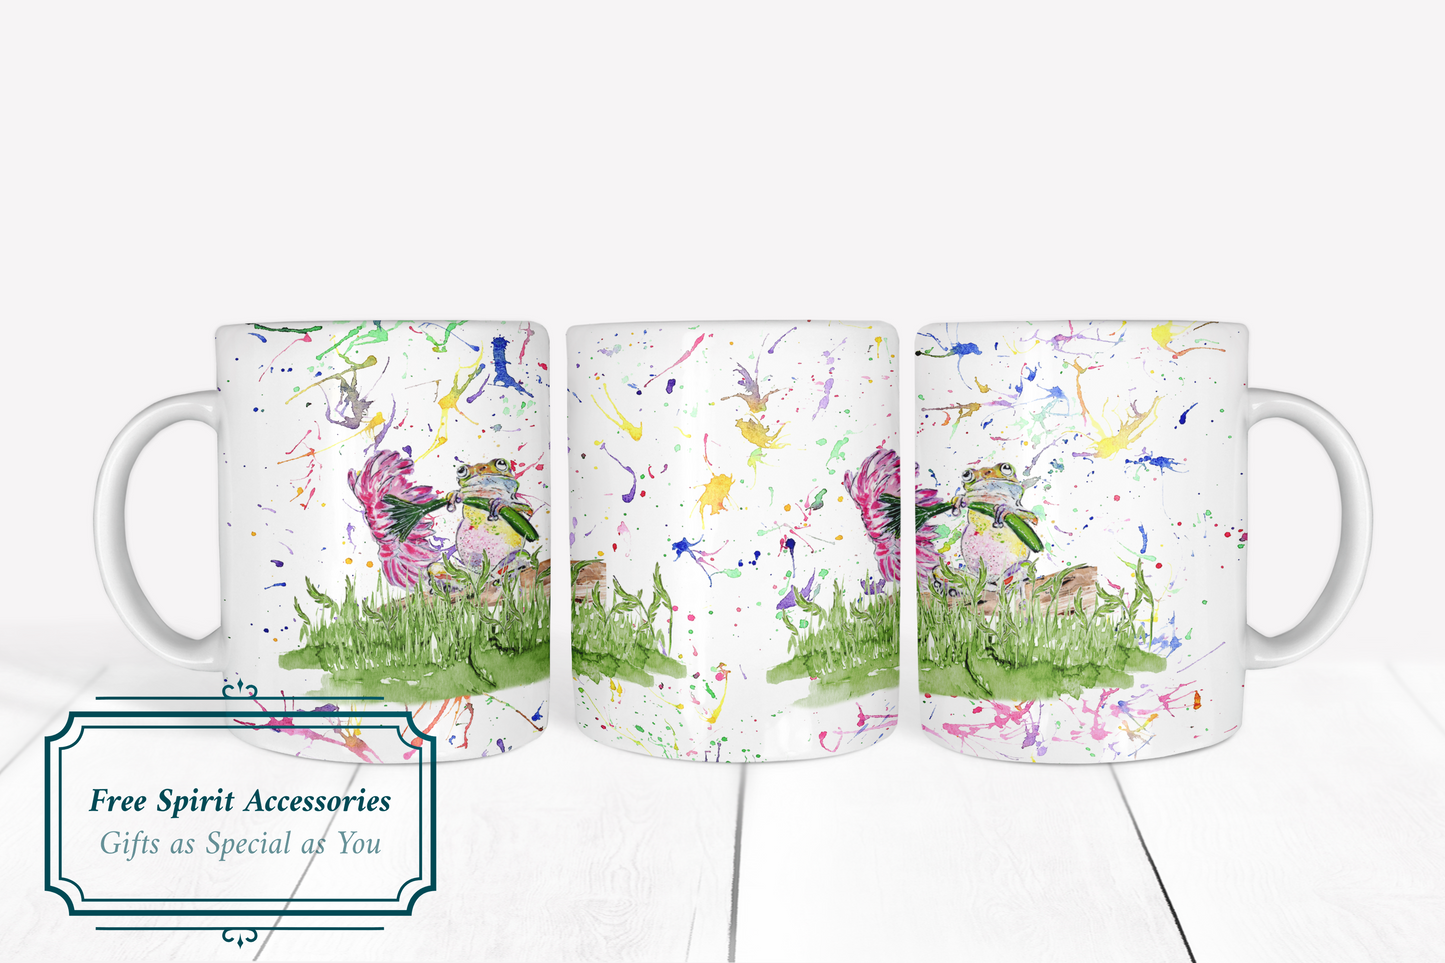  Rainbow Splashed Watercolour Frog and Flower Mug by Free Spirit Accessories sold by Free Spirit Accessories